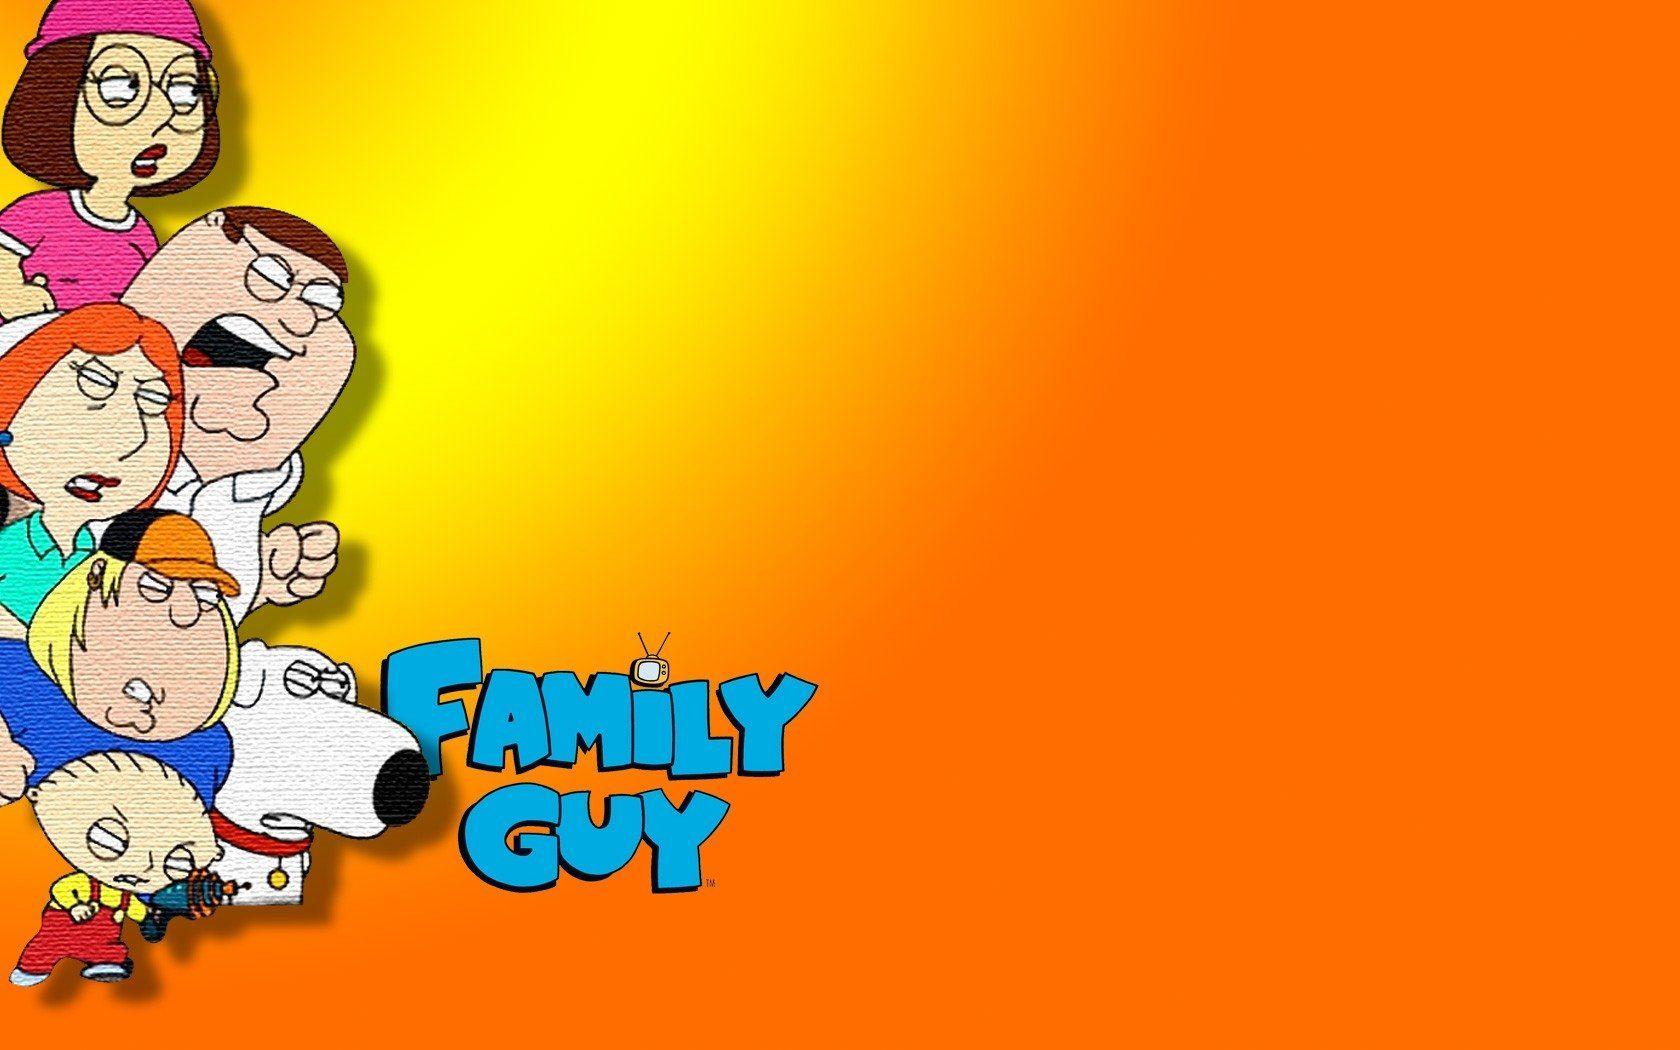 Family Guy Wallpaper and Background Imagex1050